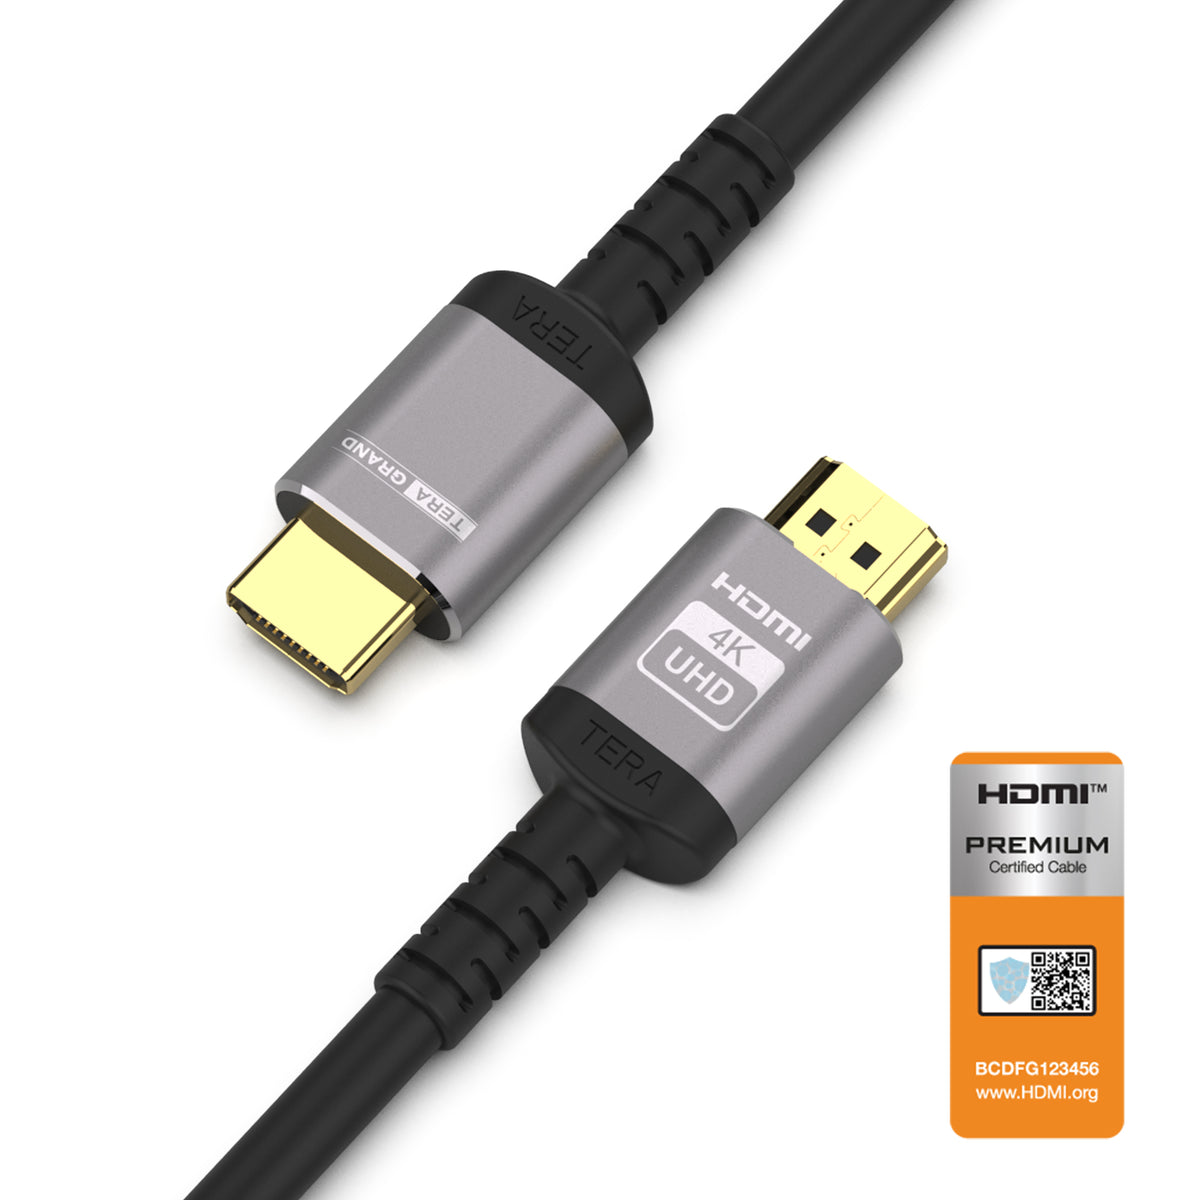 Premium HDMI 2.0 Cable with Aluminum housing, Supports 4K HDR UltraHD, 18 Gbps, 4K/60Hz, 10 Feet ( 3 meter) — Tera Grand